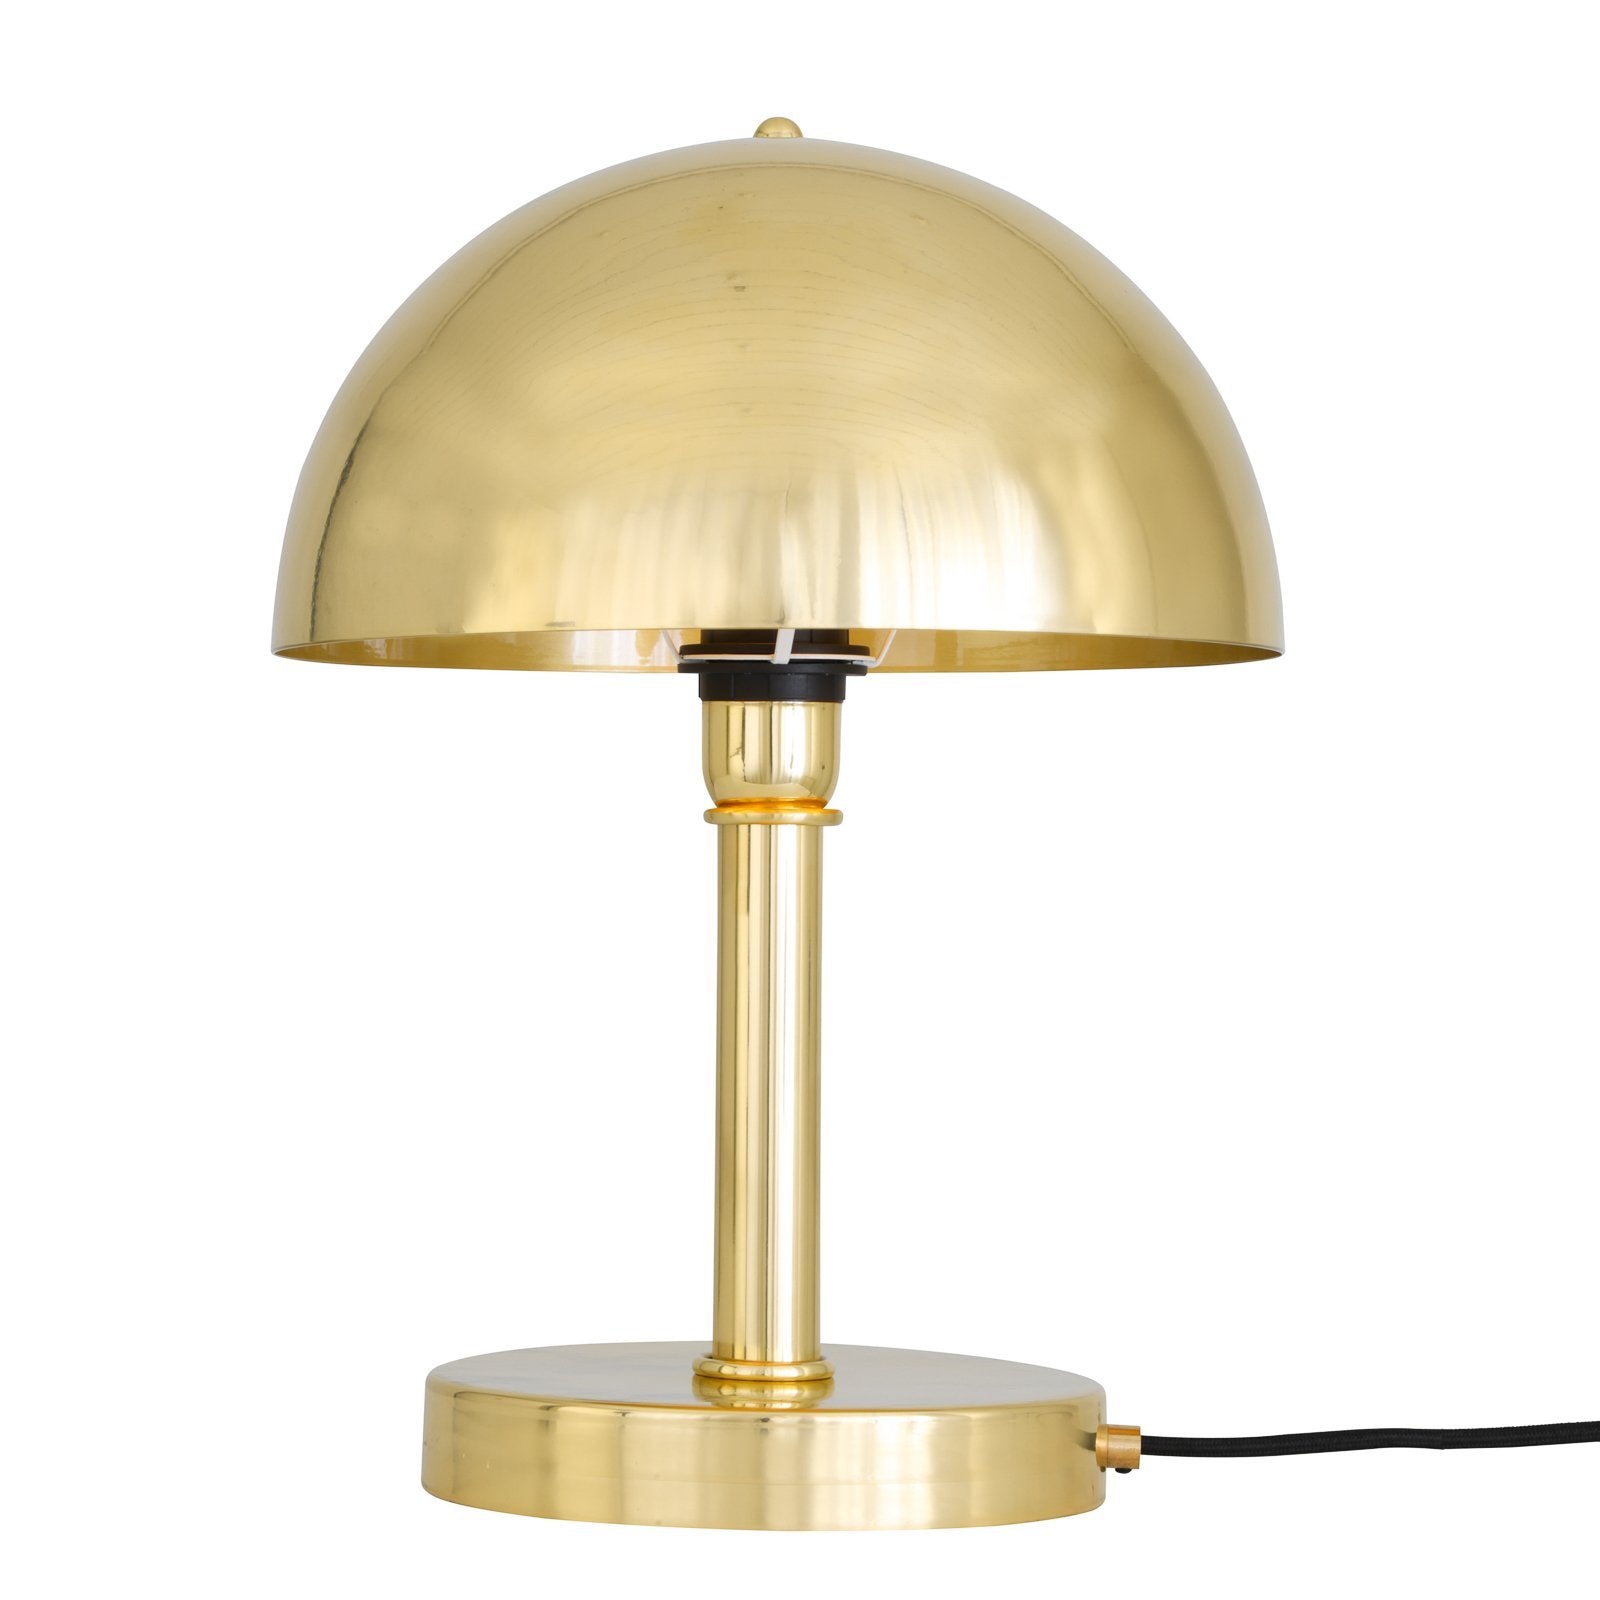 Turku Table Lamp - Table Lamps from RETROLIGHT. Made by Mullan Lighting.